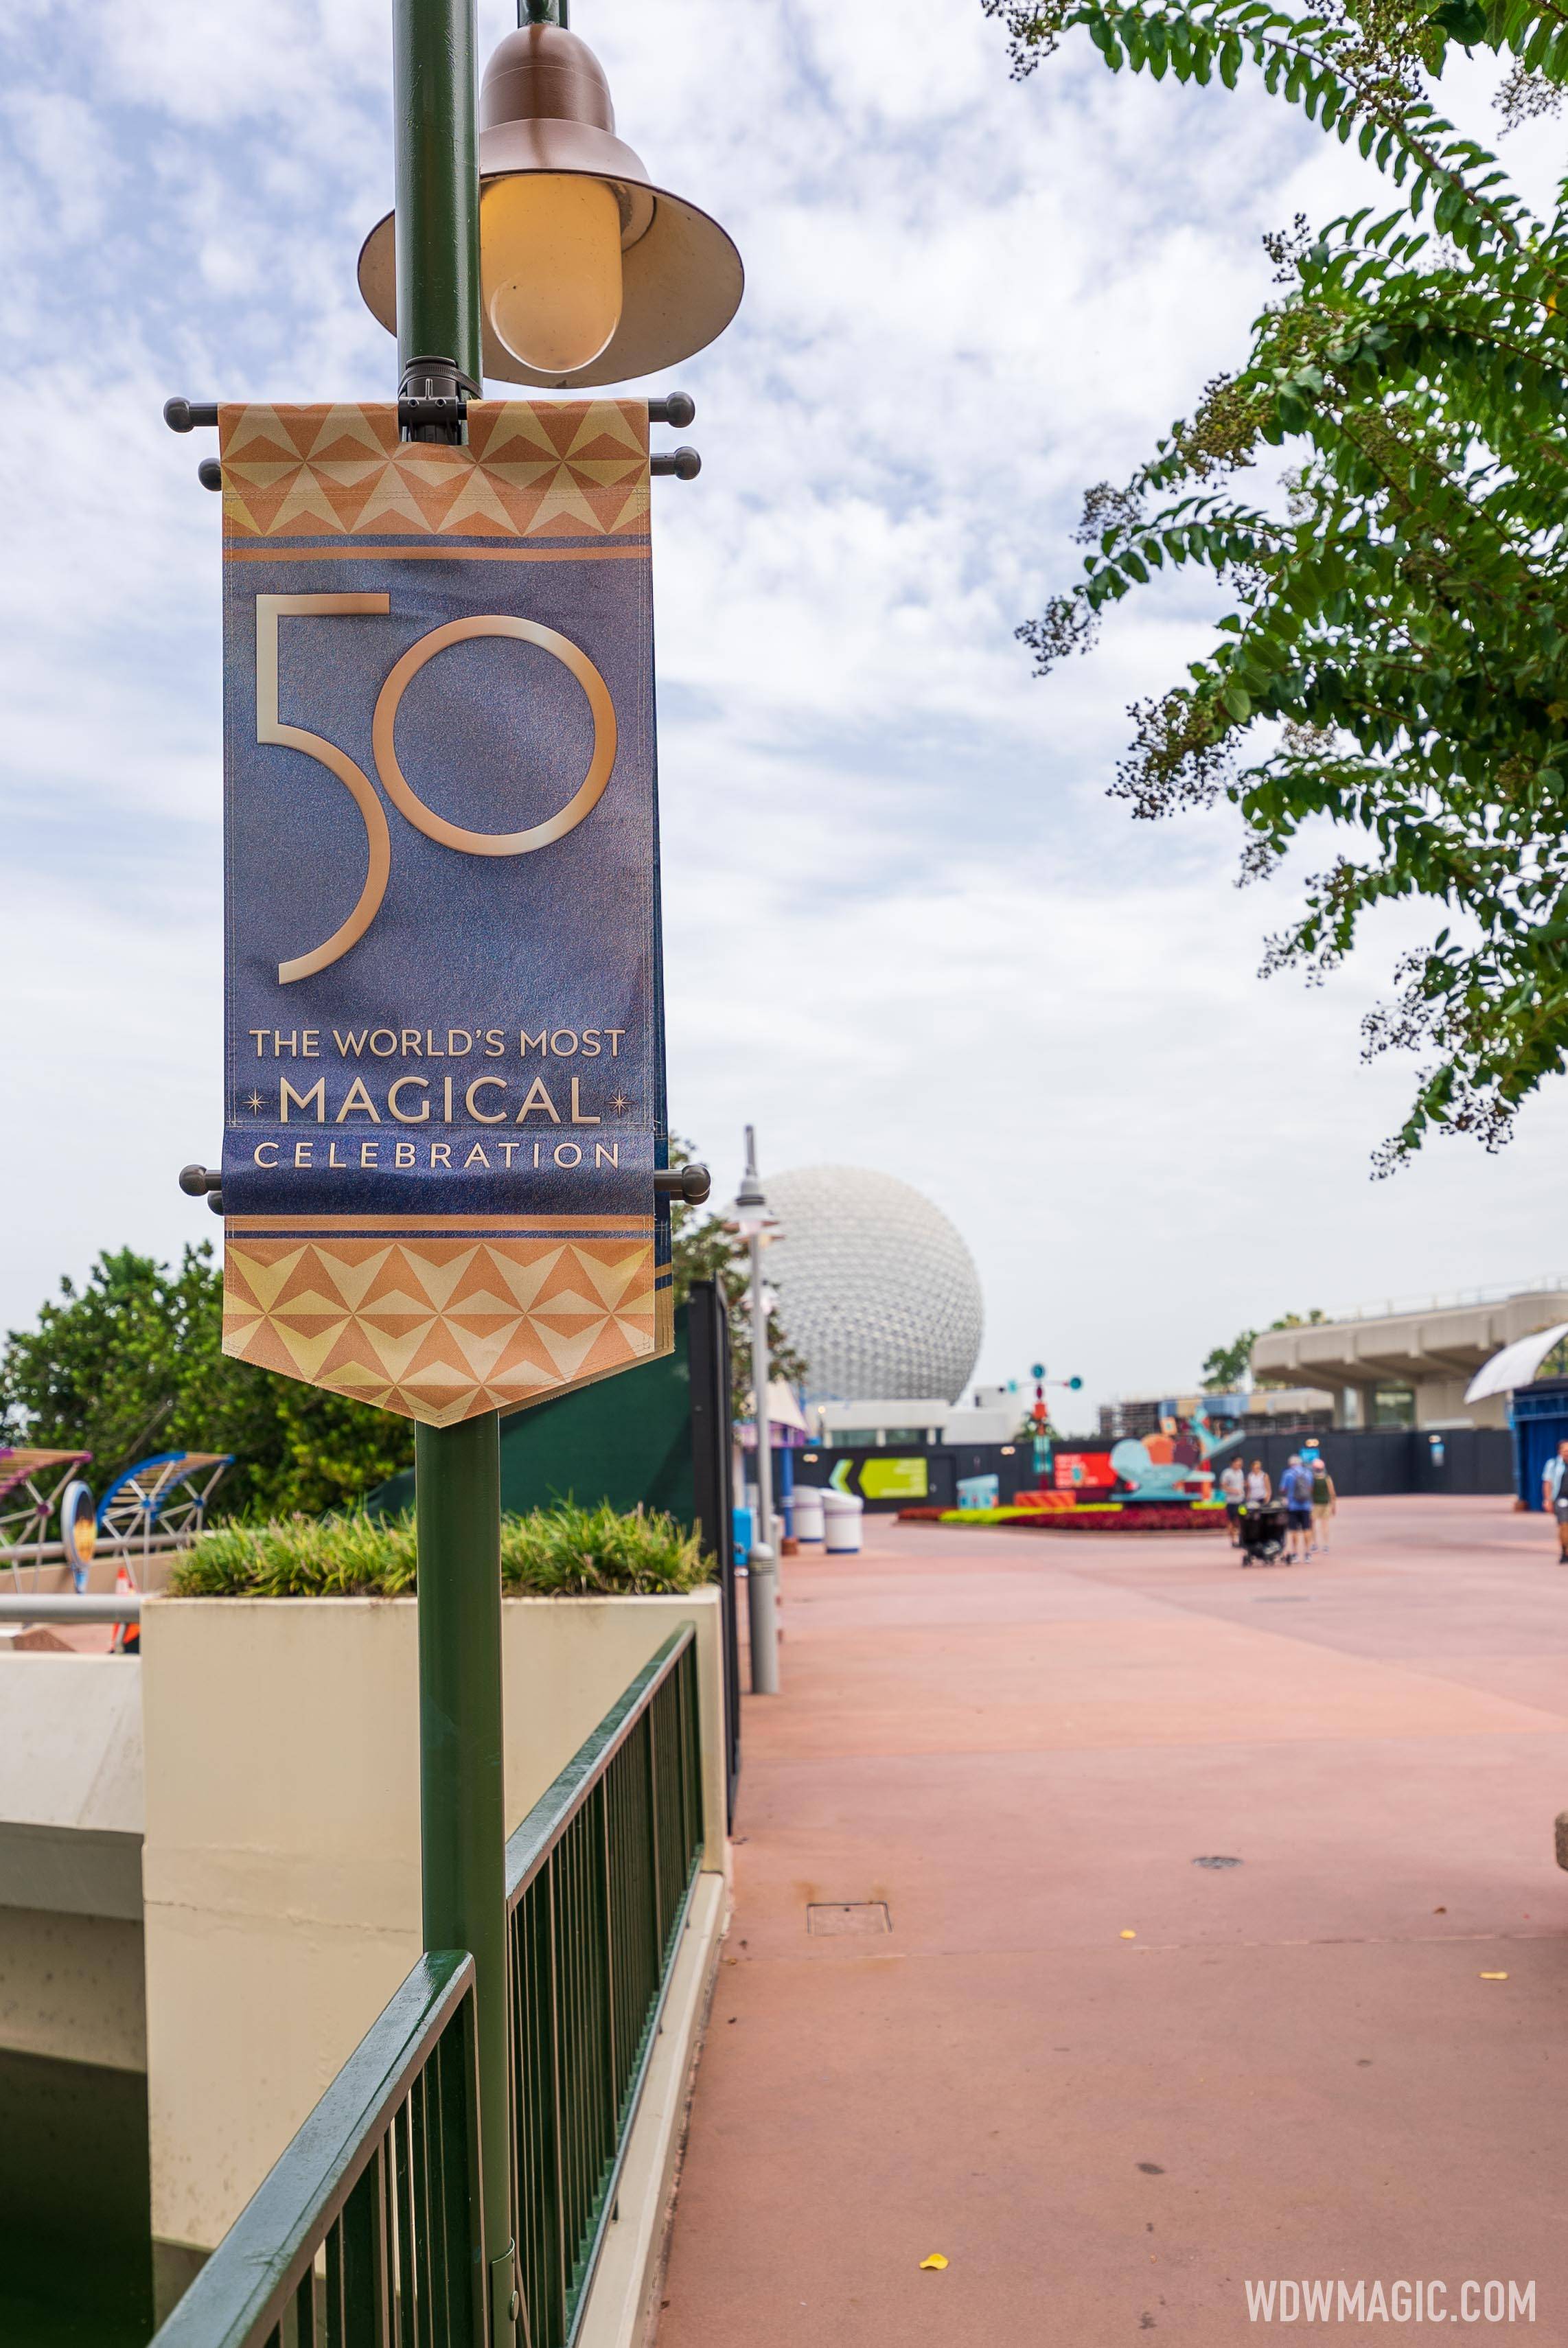 The World's Most Magical Celebration banners at EPCOT